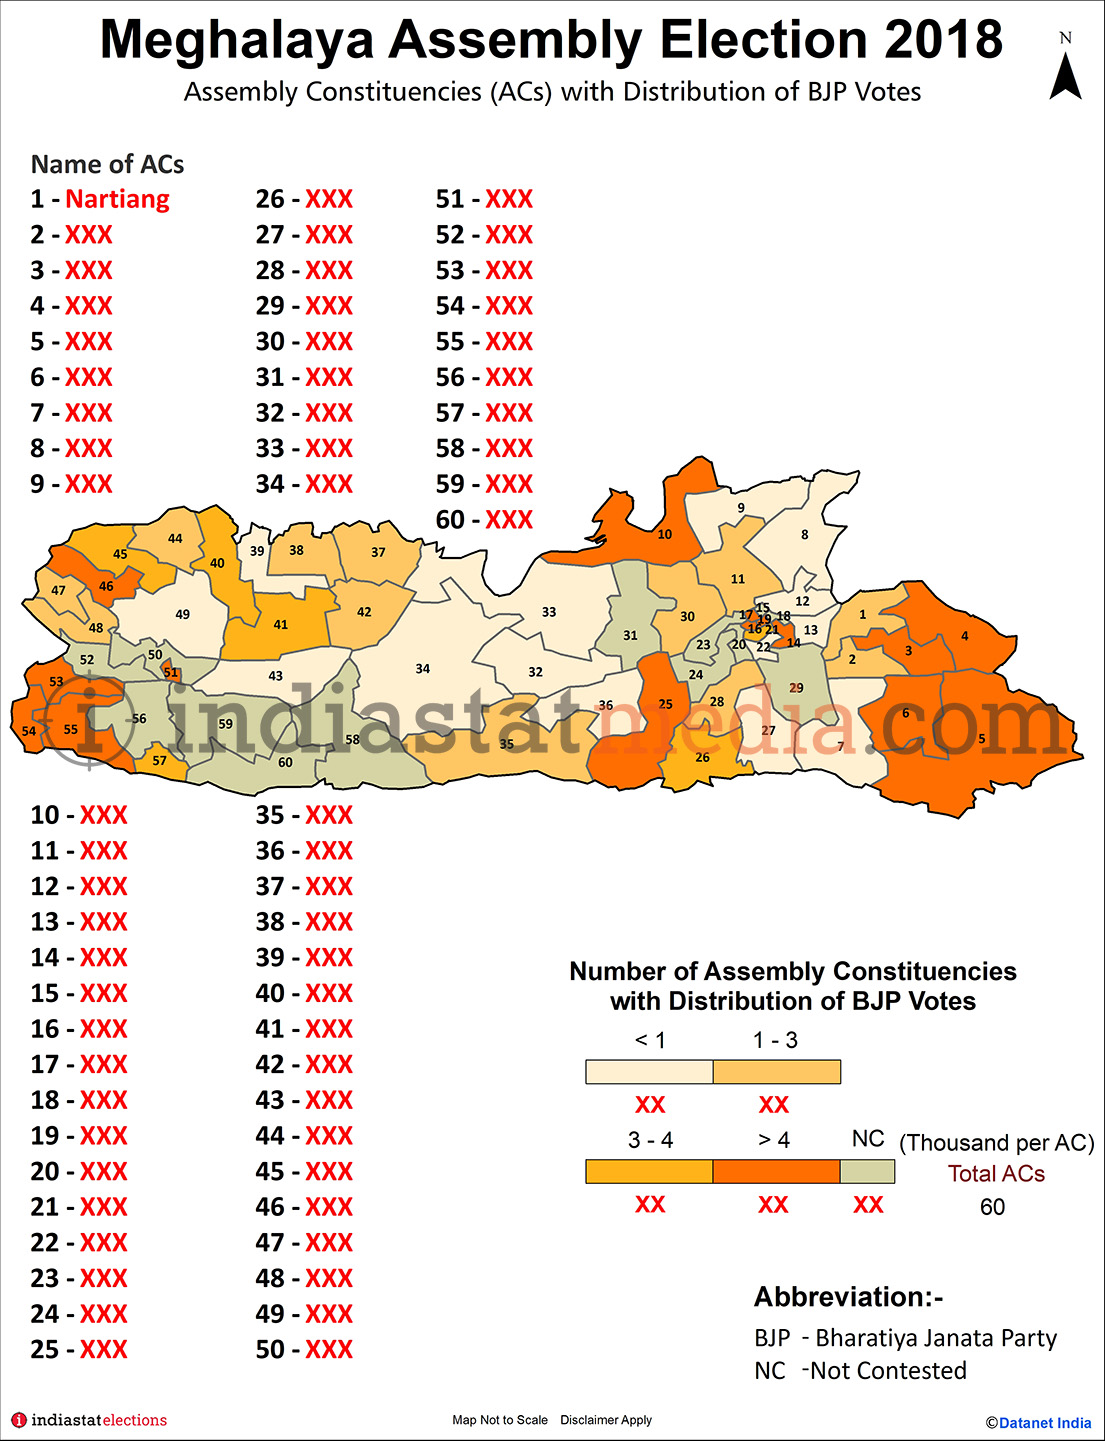 Distribution of BJP Votes by Constituencies in Meghalaya (Assembly Election - 2018)